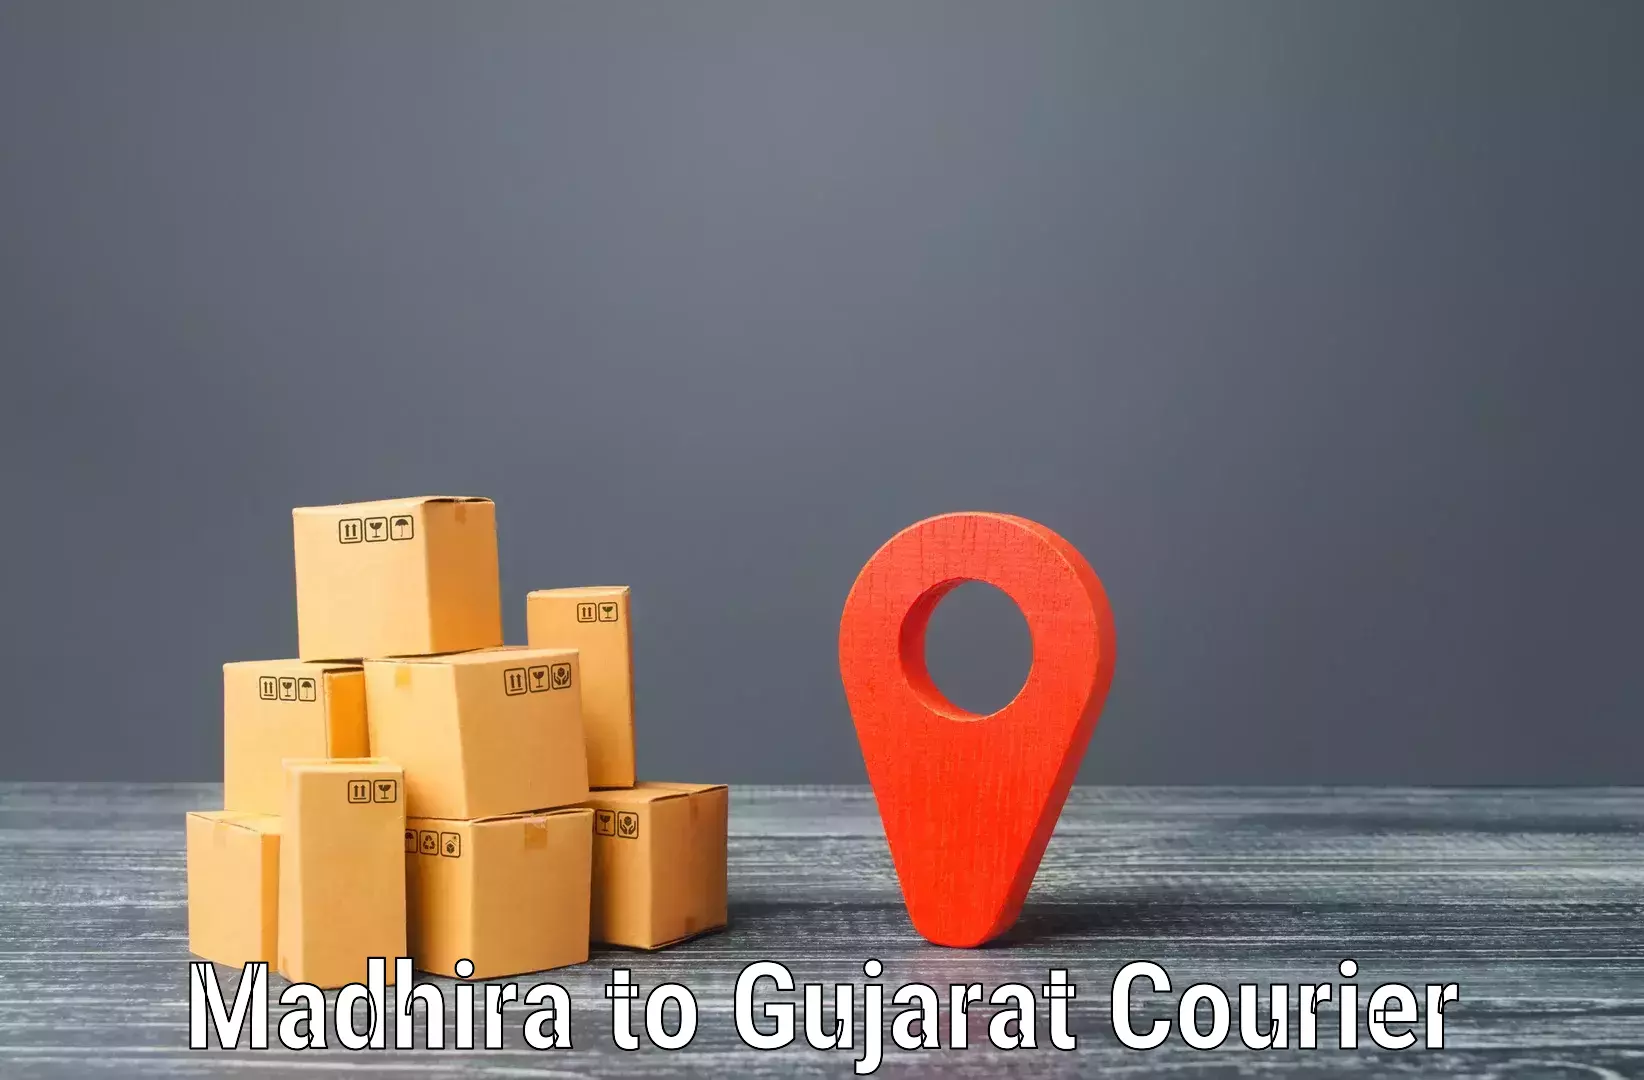 24-hour courier service in Madhira to Rajkot